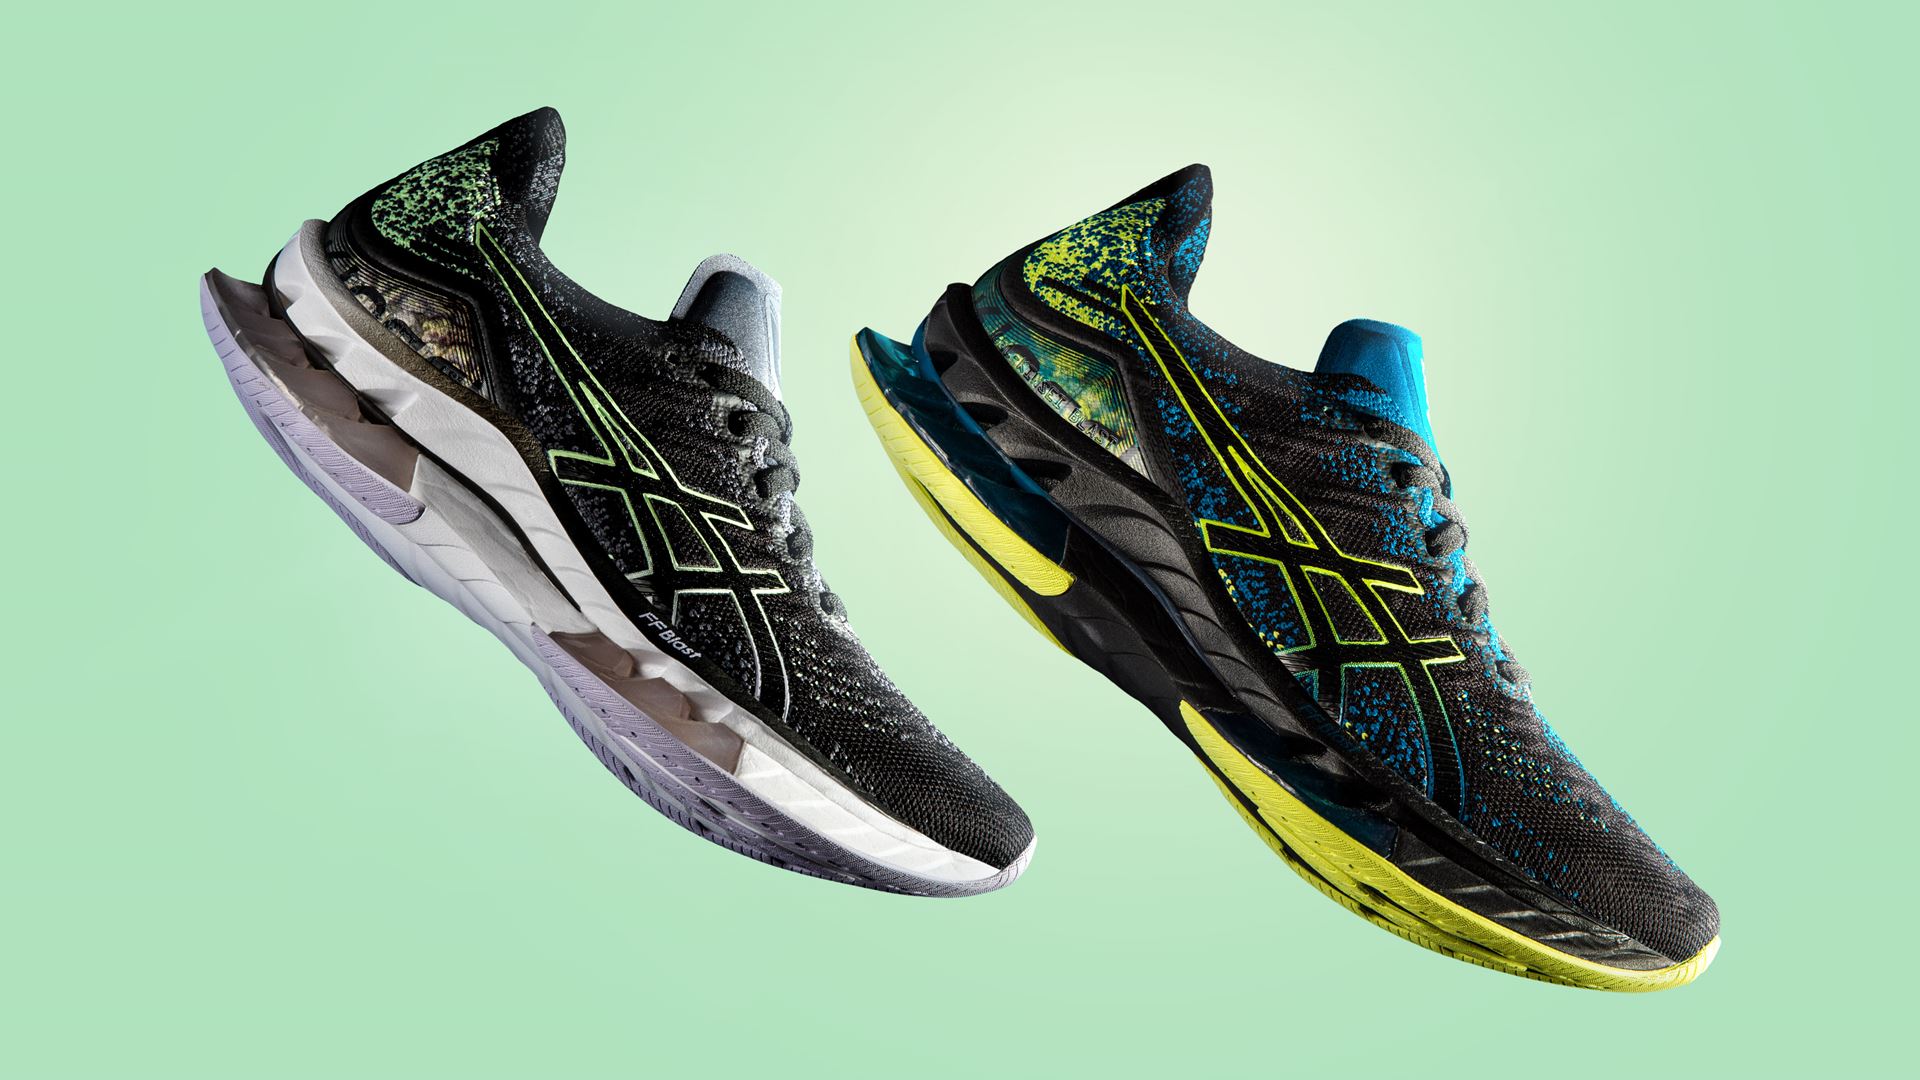 Uplift your mind in style with the new ASICS GEL-KINSEI™ Blast